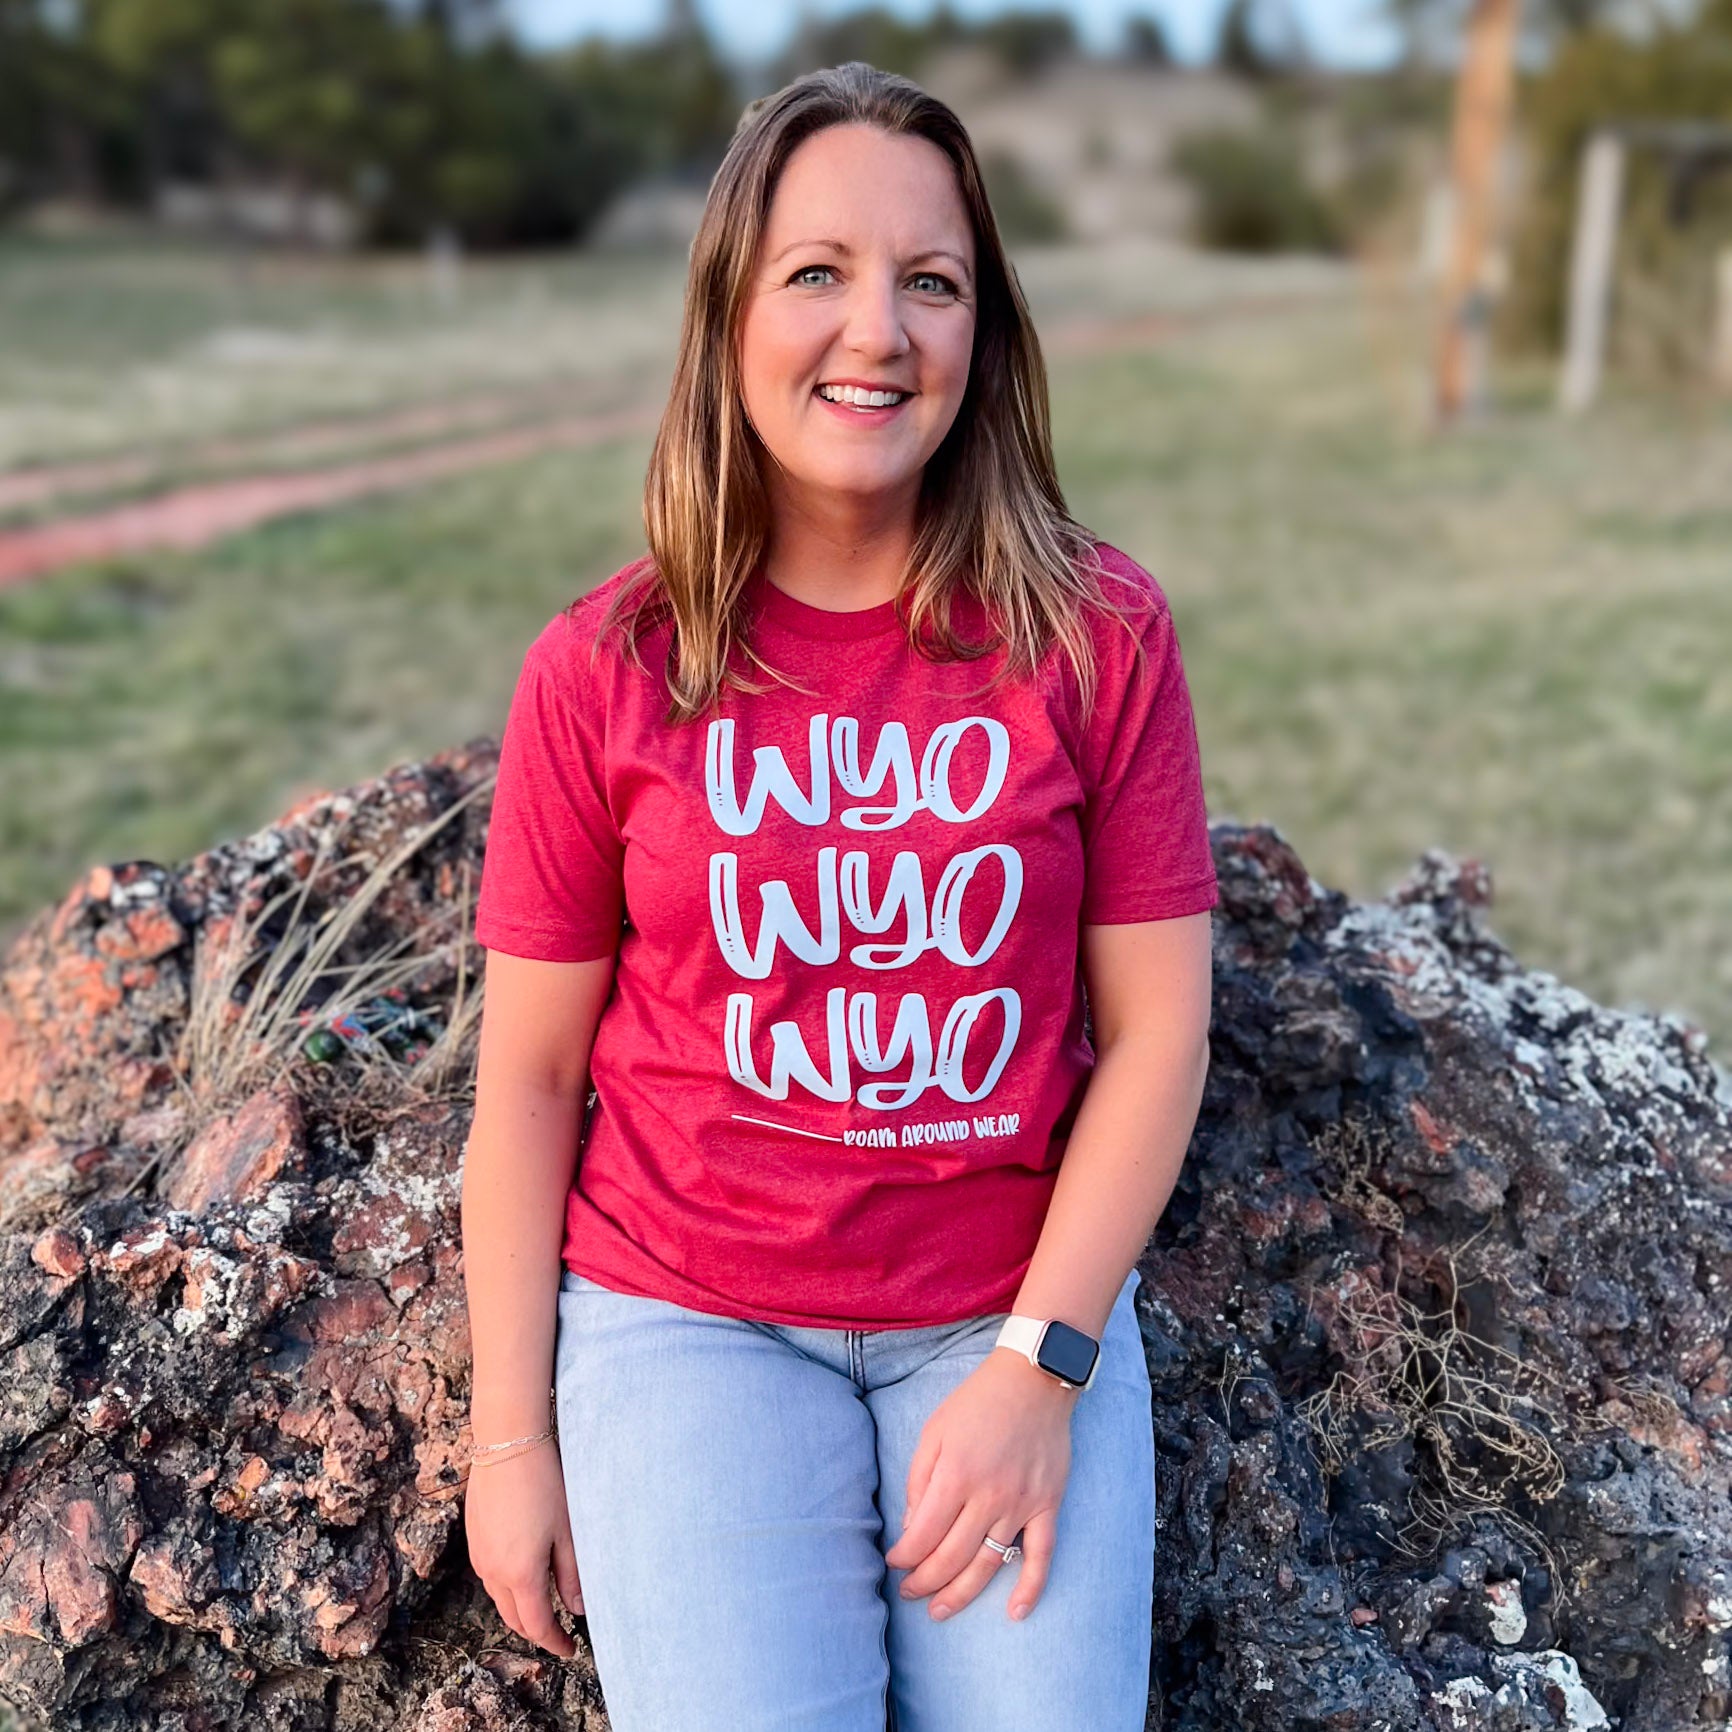 Roam Around Wear is a Wyoming t-shirt company based out of Gillette, Wyoming. Wyoming red and blue tee. Unisex tee. Wyoming t-shirt. Roam Around Wear is a Wyoming t-shirt company based in Gillette, Wyoming